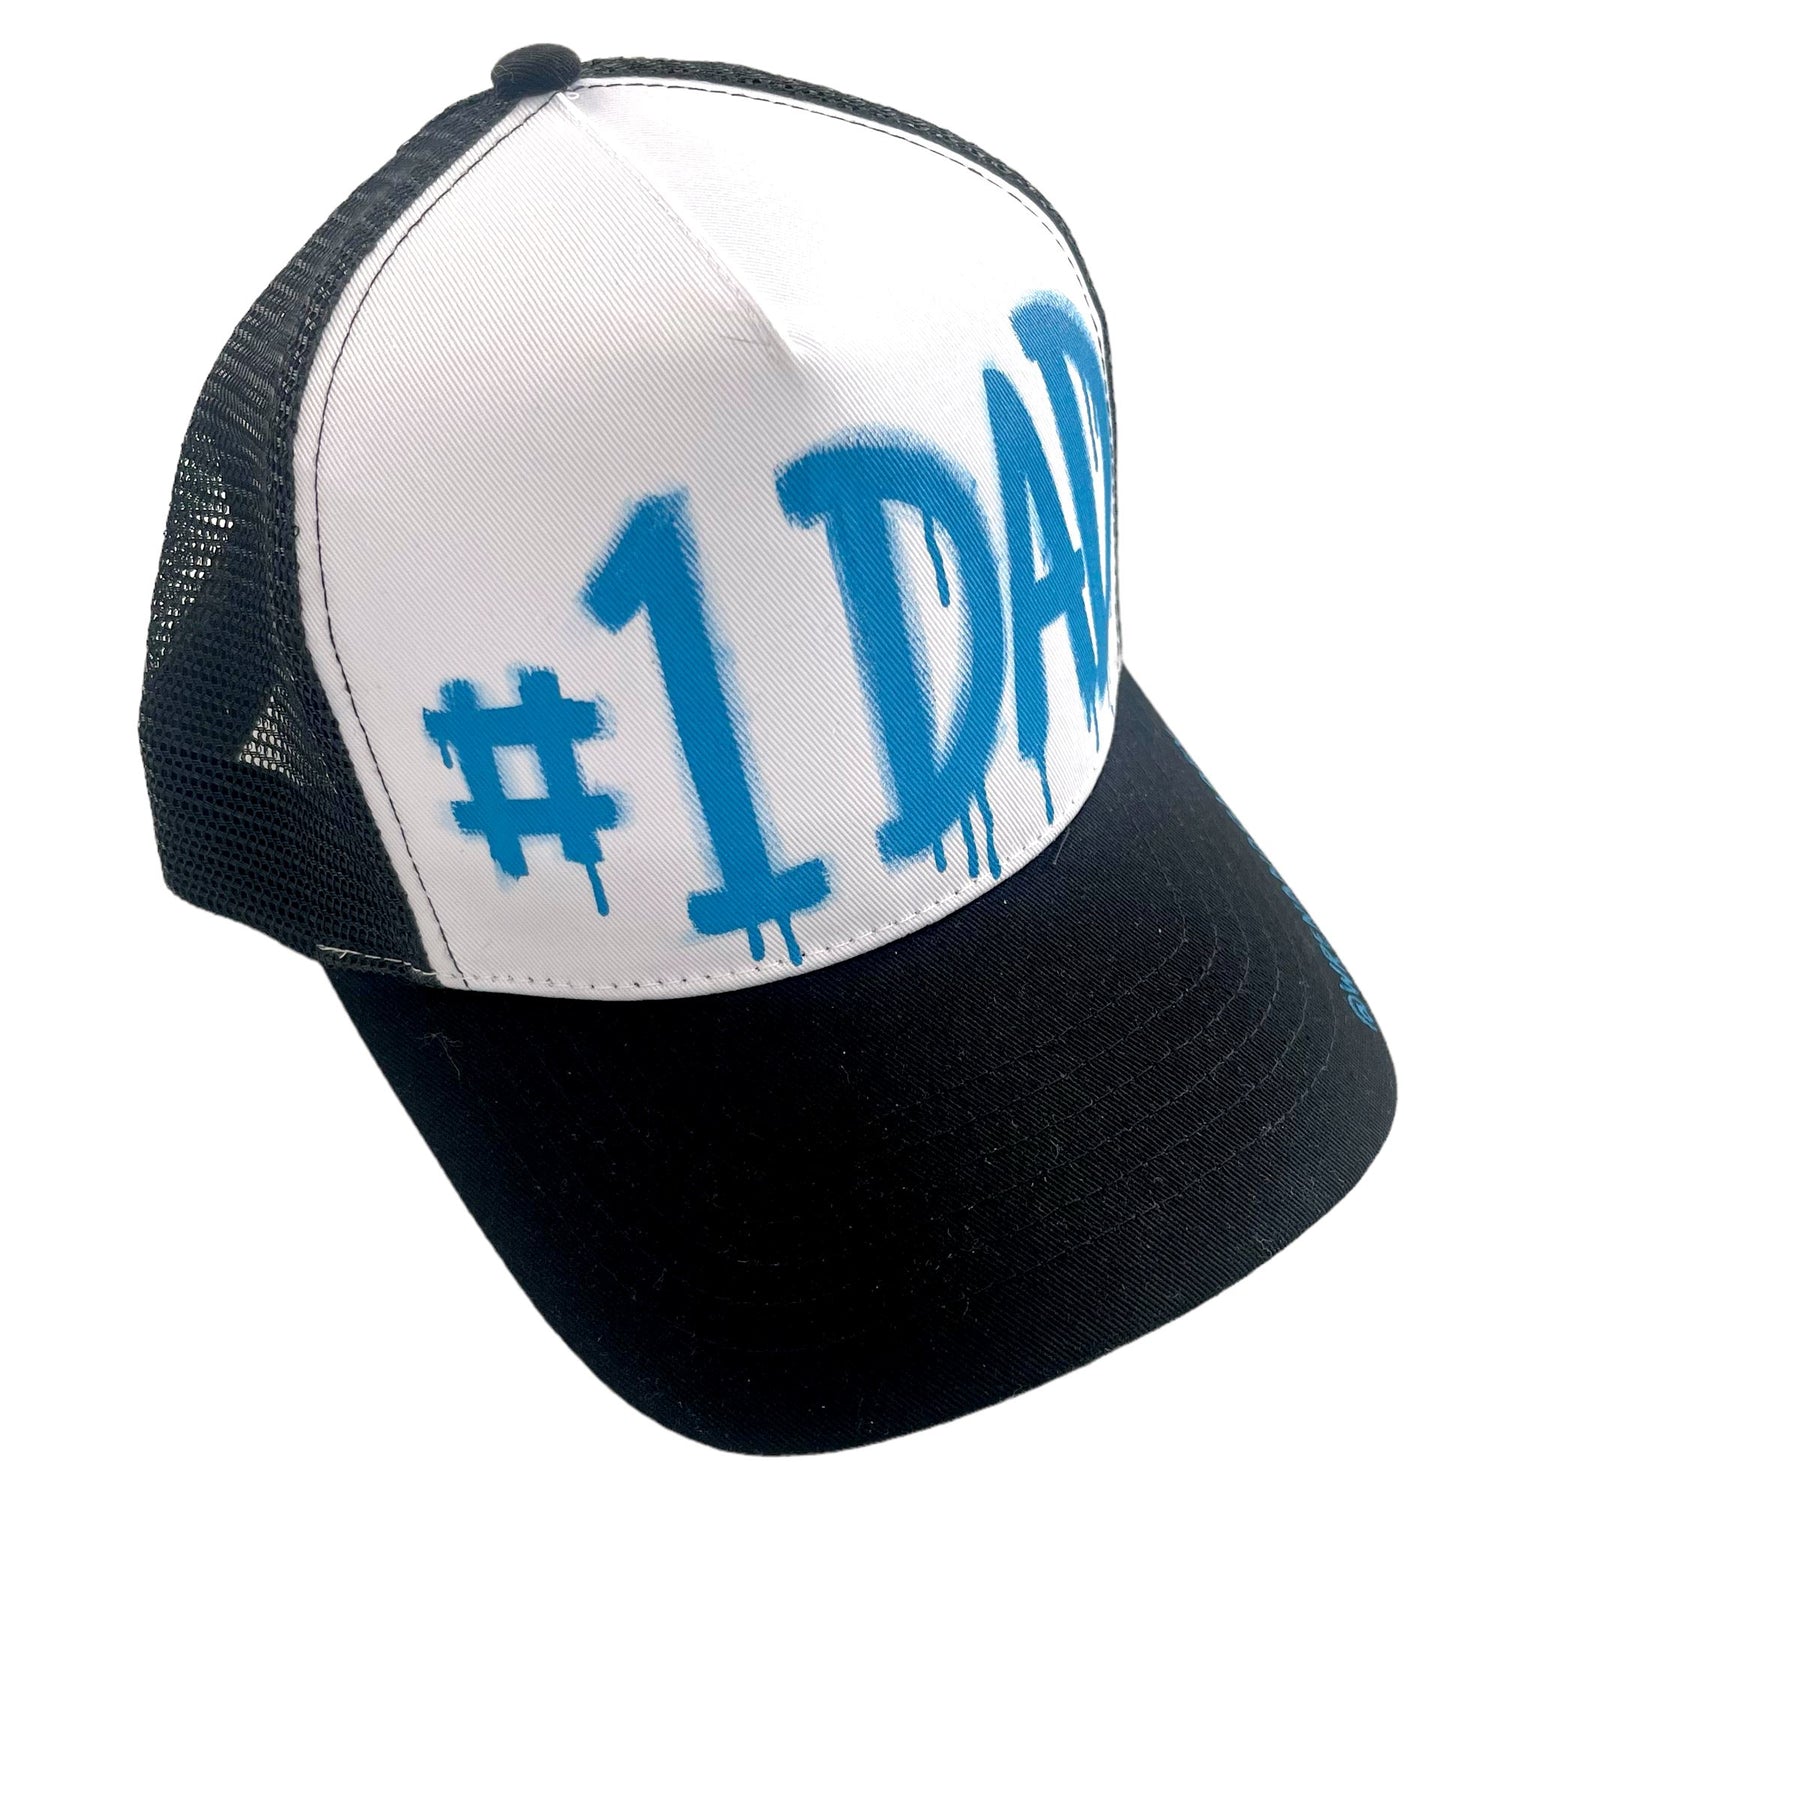 '#1 Dad' Painted Hat